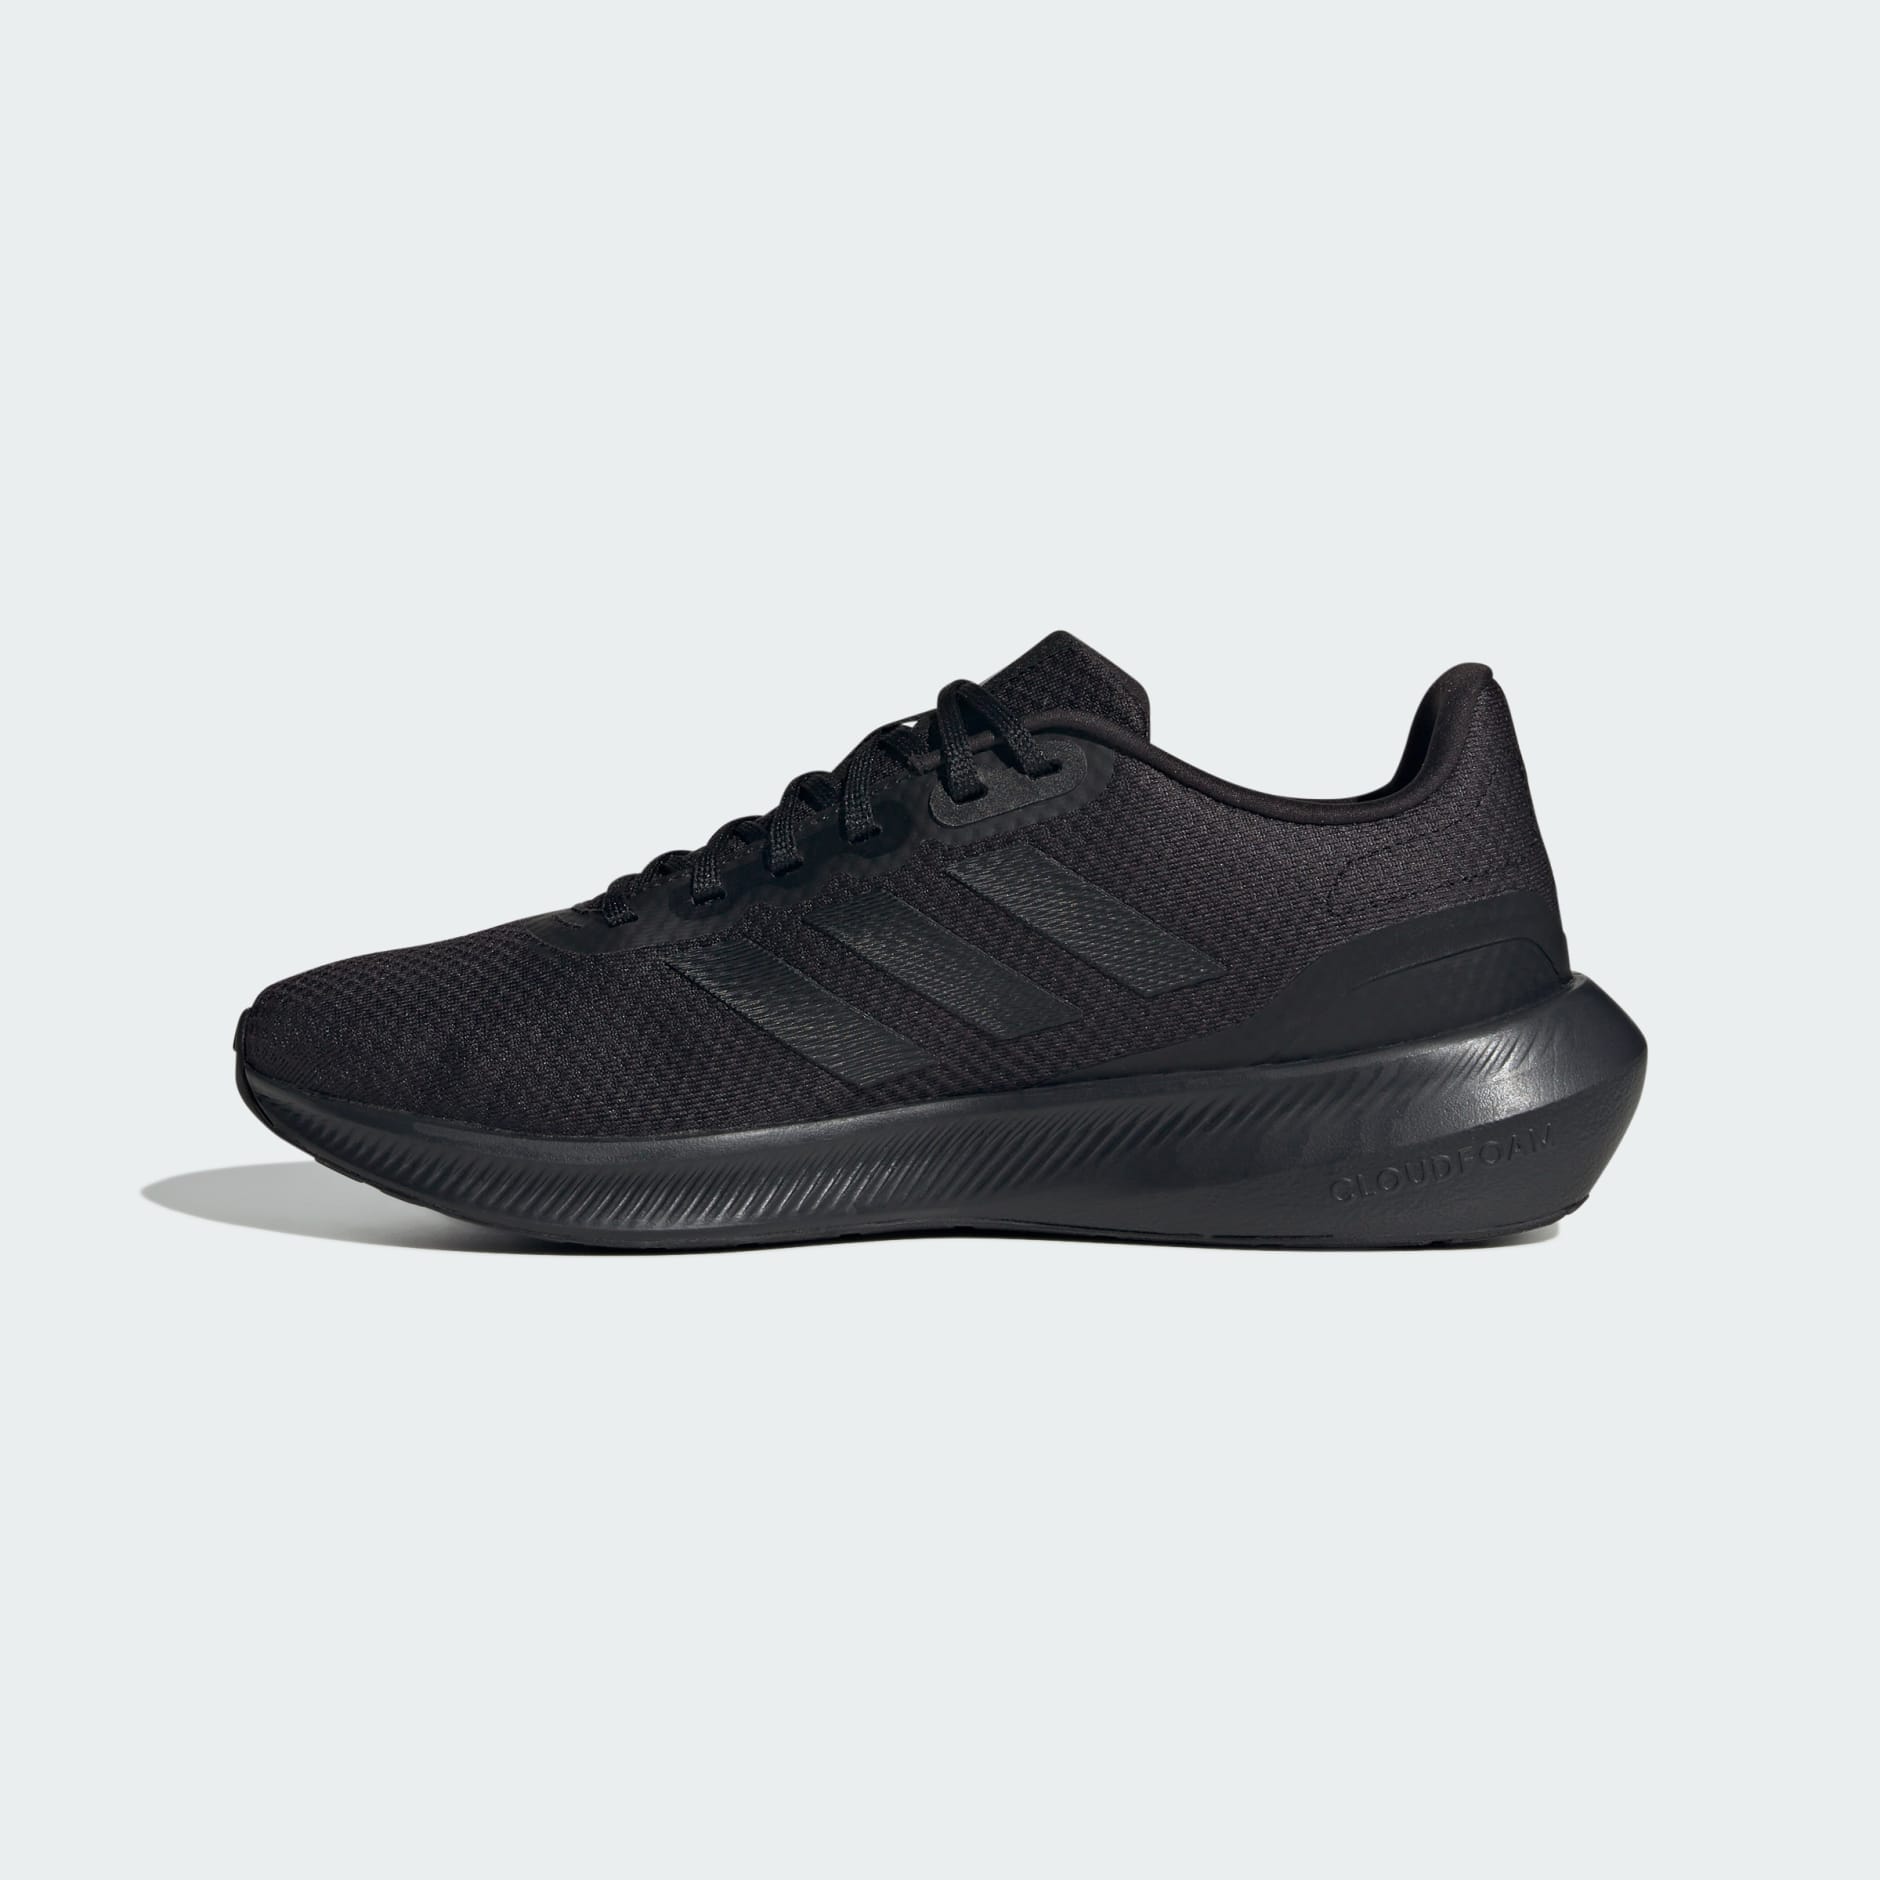 Find Out Where To Get The Shoes | Black adidas shoes, Black and gold  sneakers, Adidas shoes women